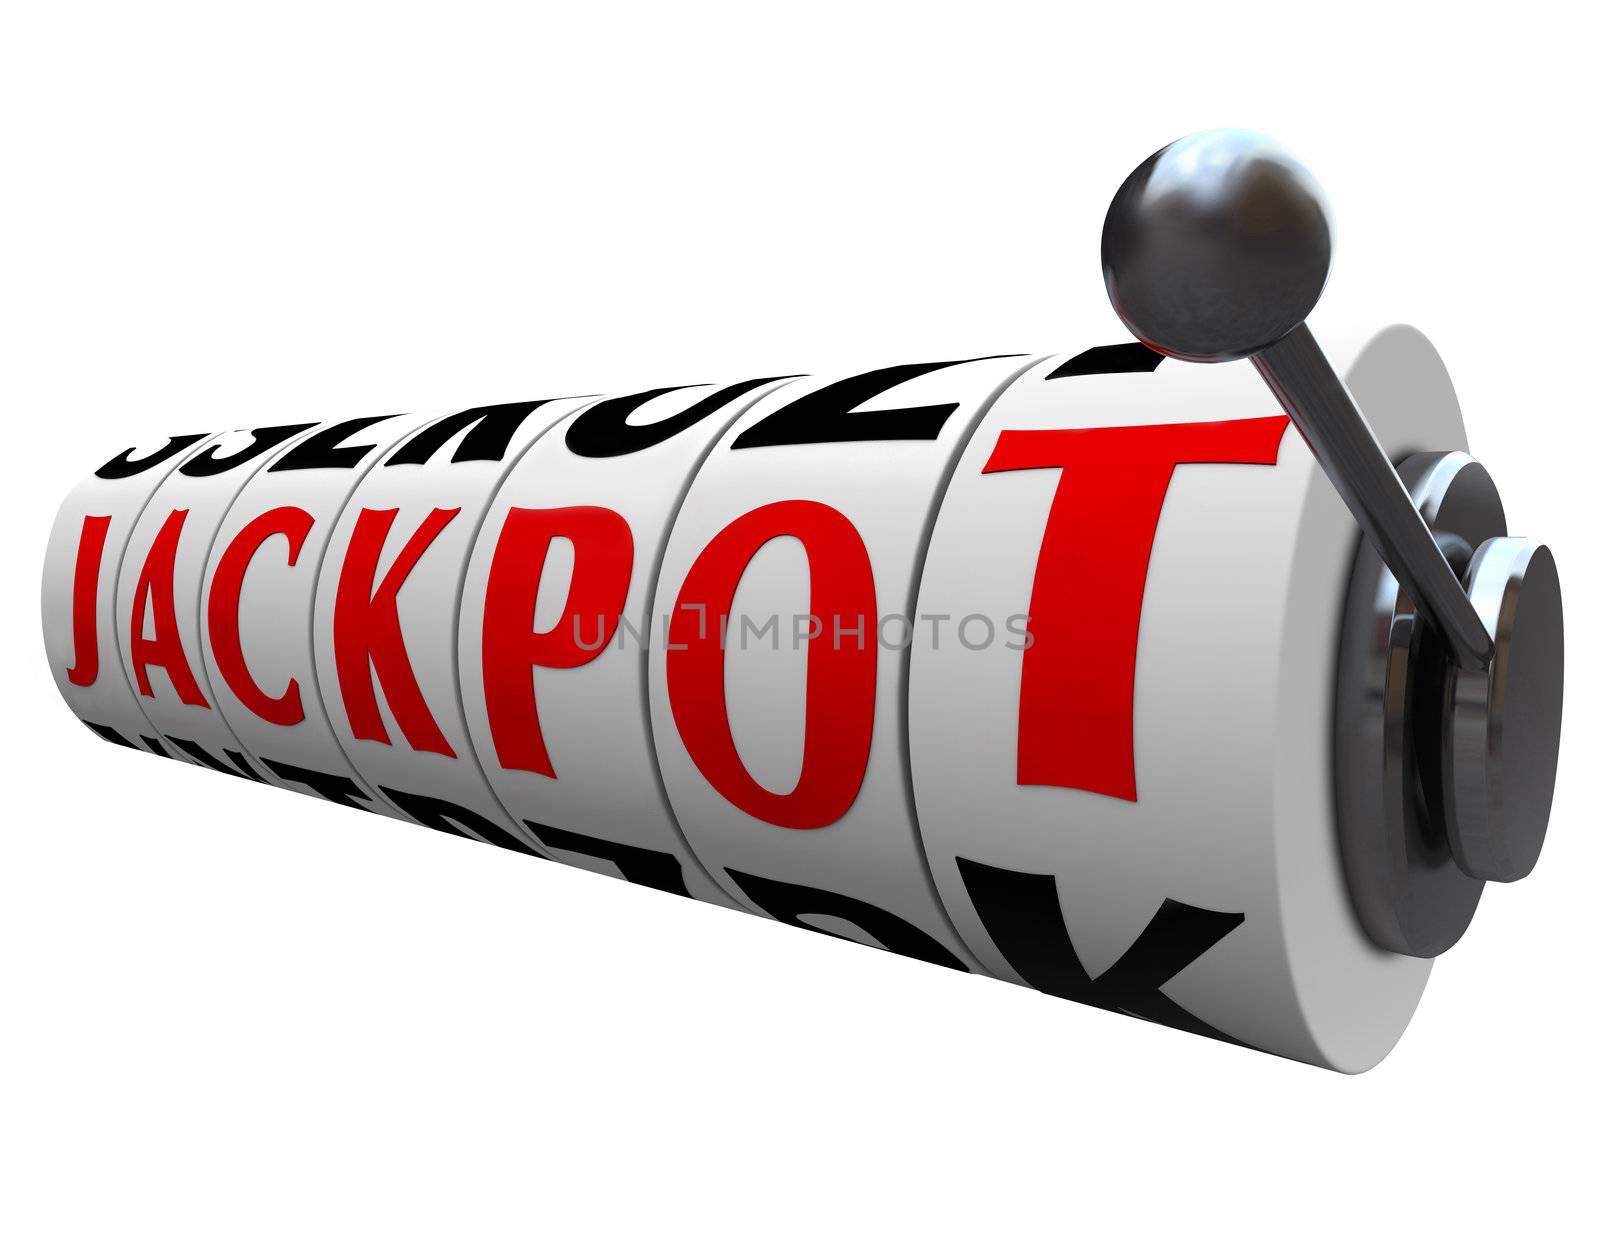 The word Jackpot appears on slot machine wheels illustrating the money payout of a game or form of gambling